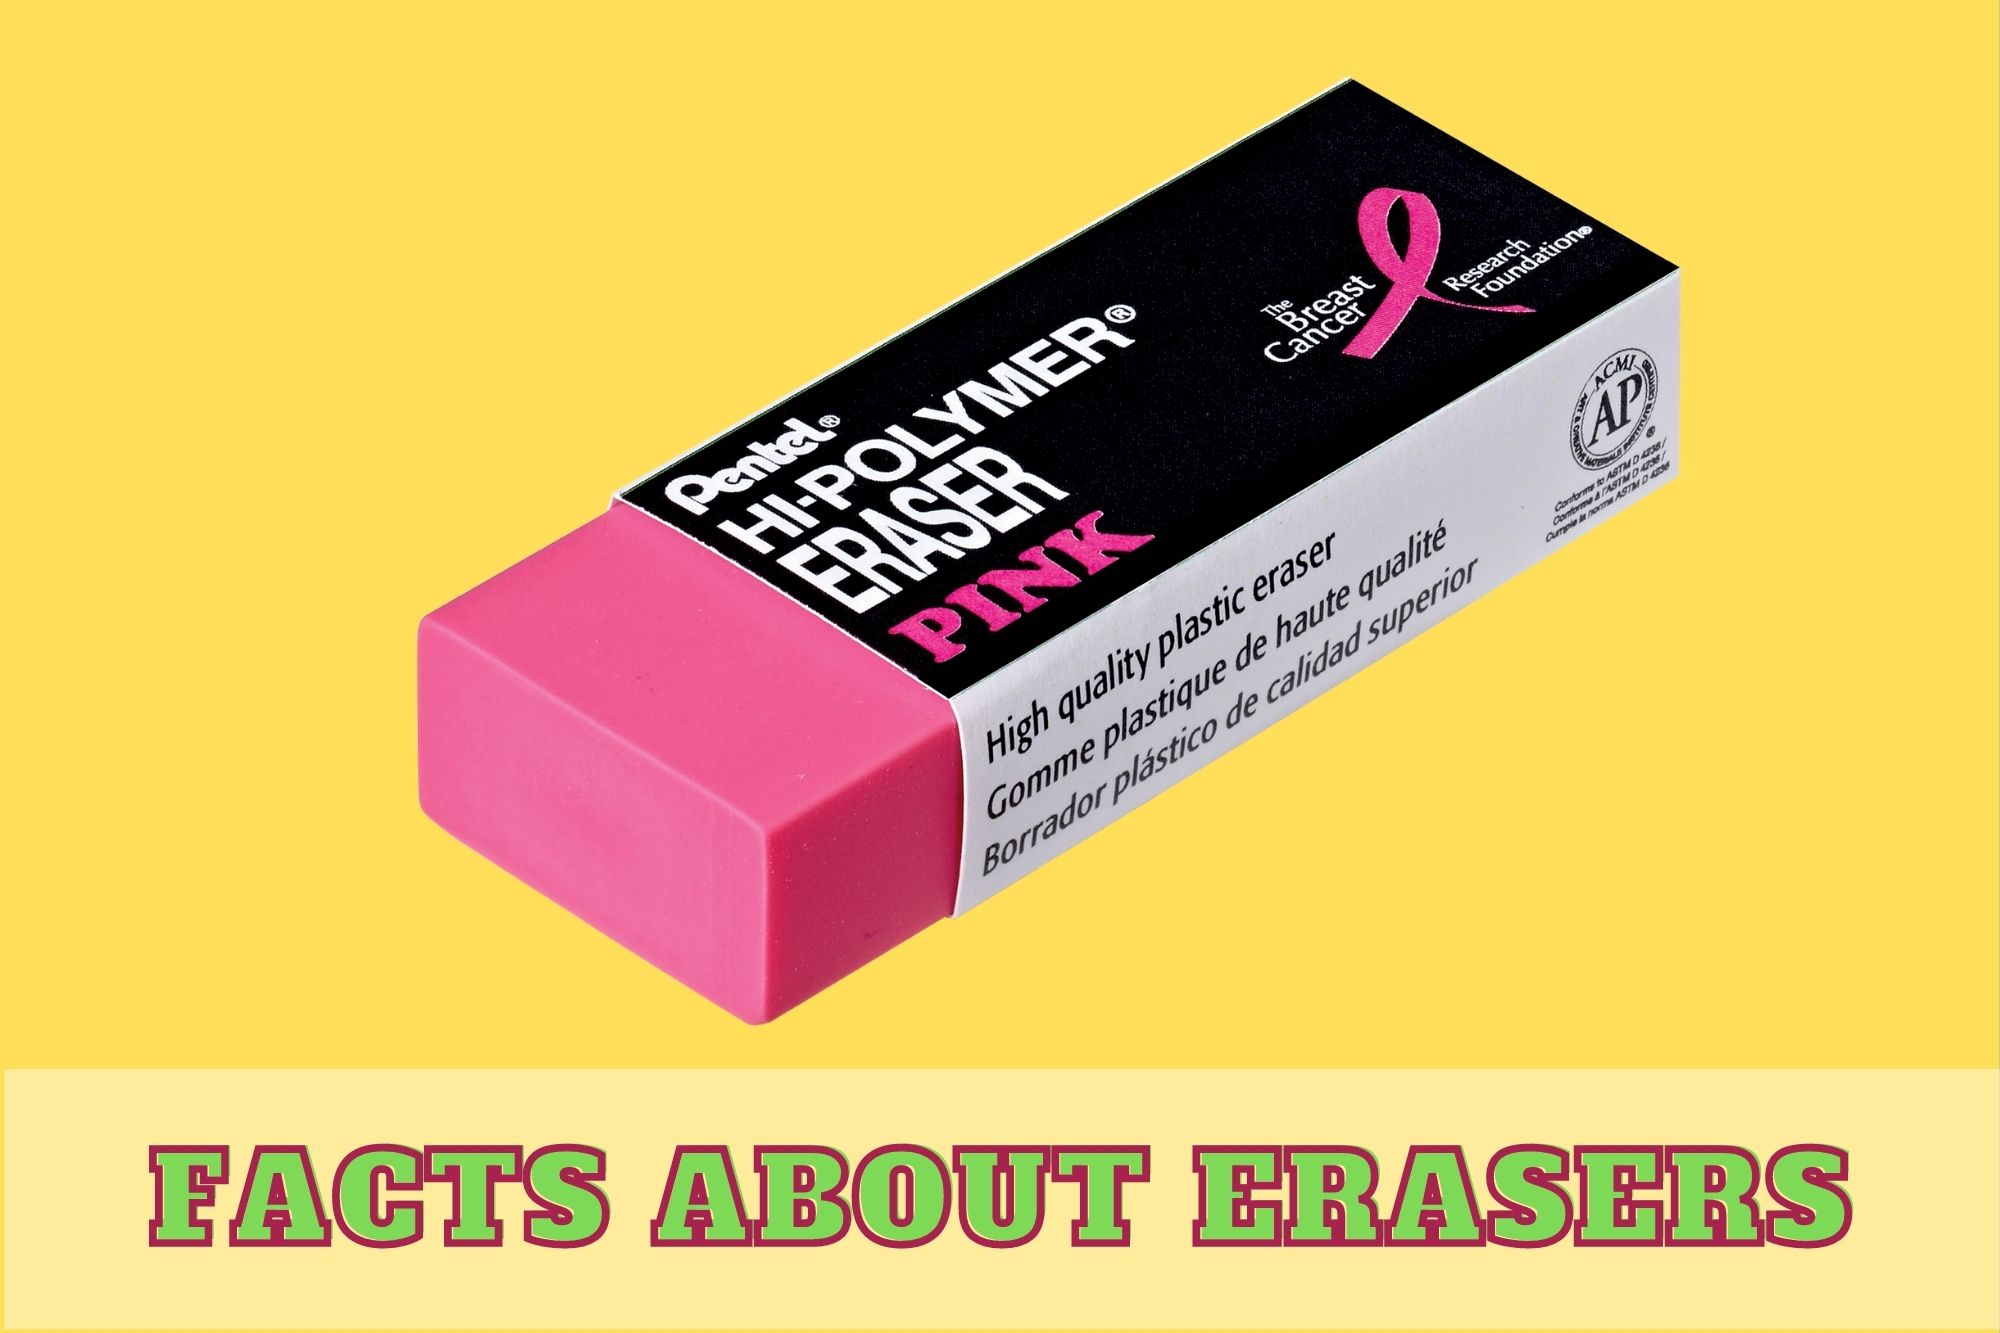 Can Erasers Be Recycled?